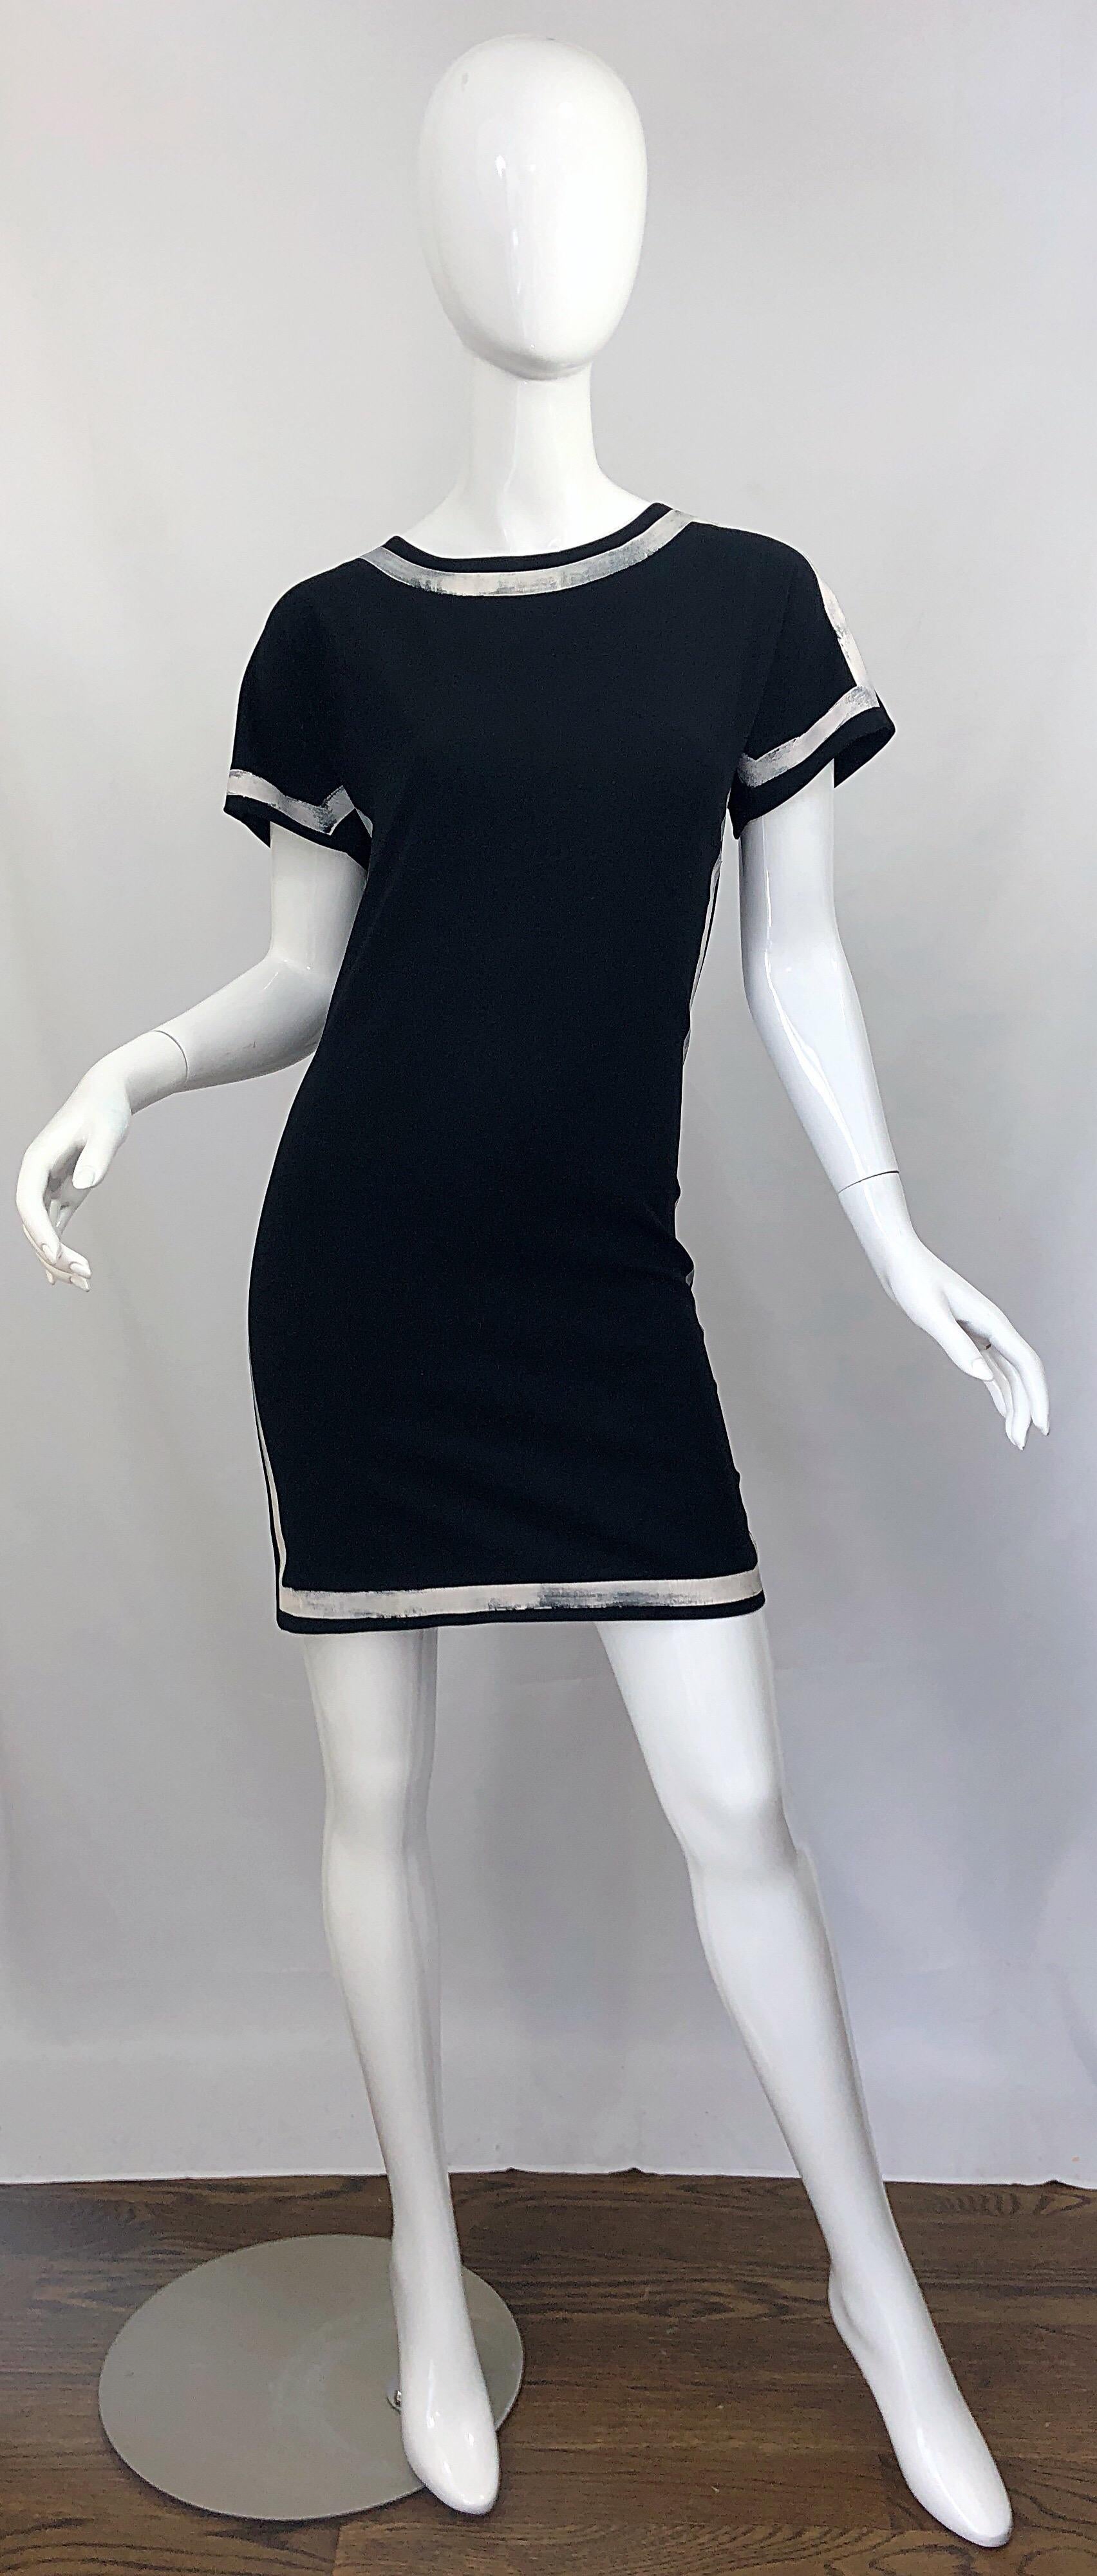 Amazing vintage early 2000s MOSCHINO CHEAP & CHIC black and white hand painted short sleeve y2k dress! Features flattering white handpainted white stripes around the neck and sleeves, and down the front and back sides. Hidden zipper up the side with